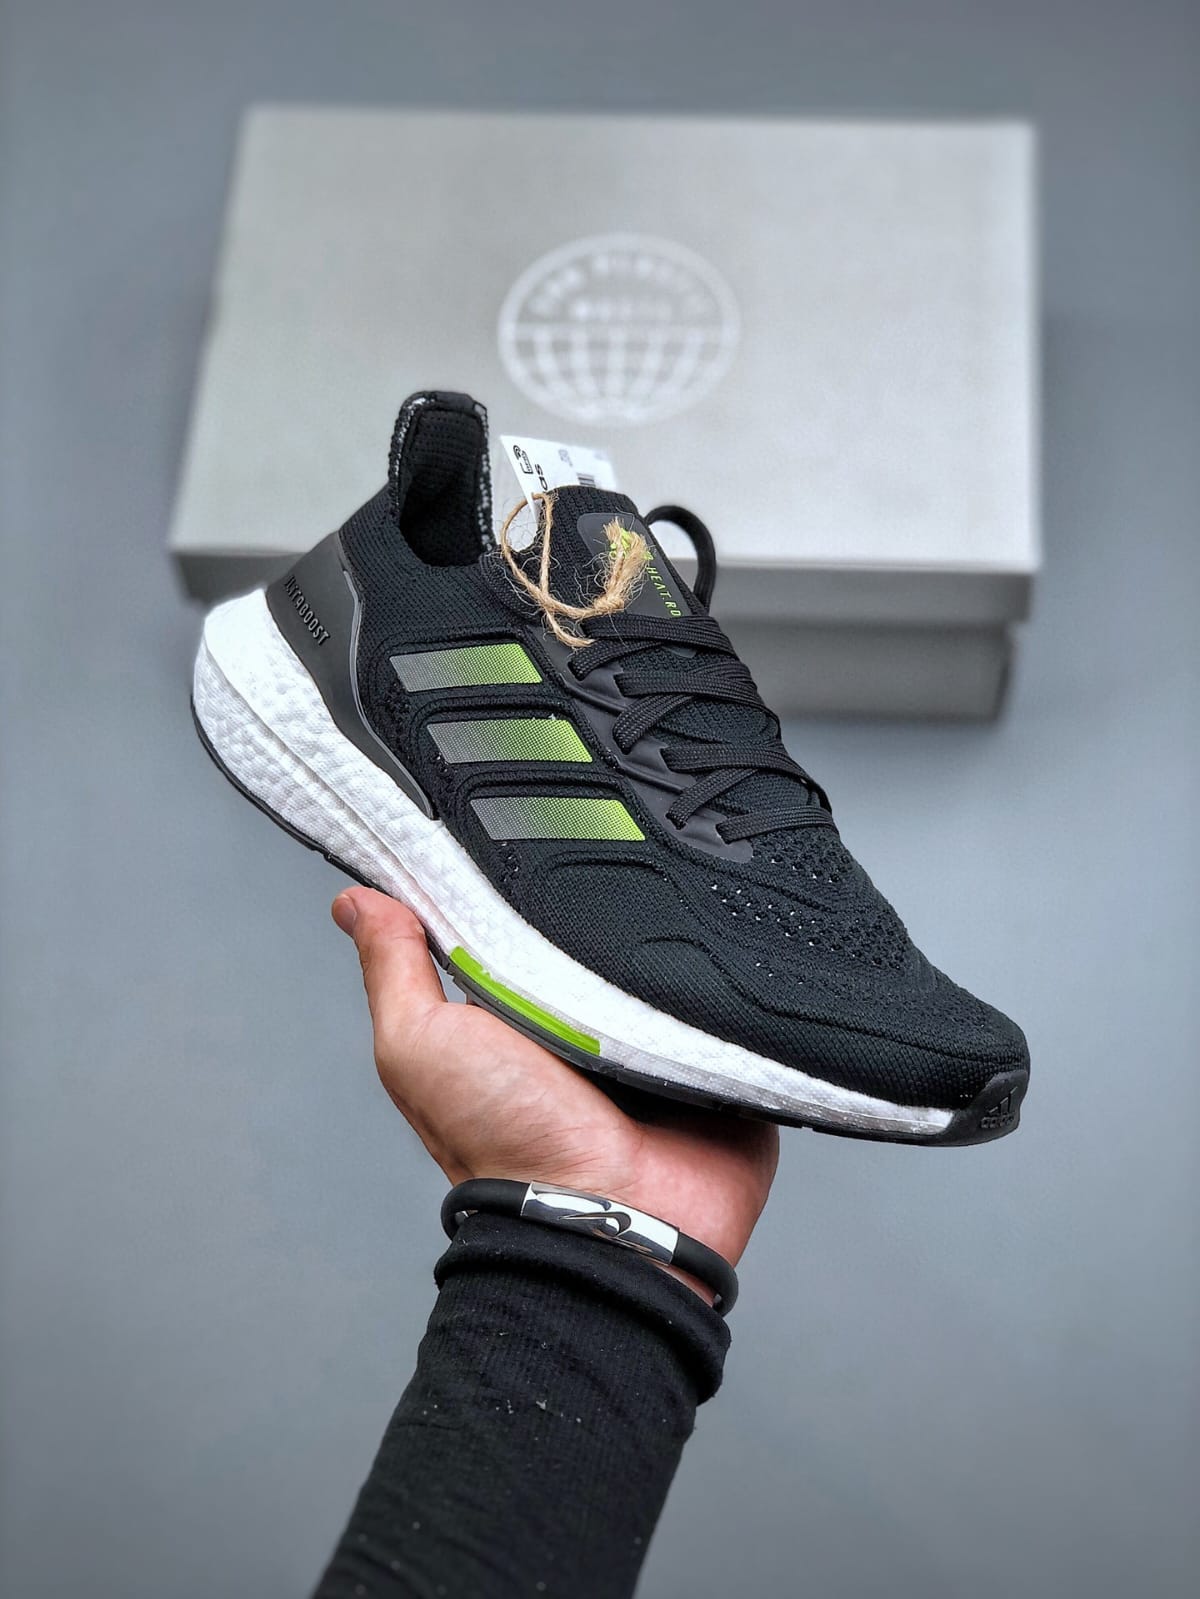 Adidas Ultra boost sneakers for men in black and white